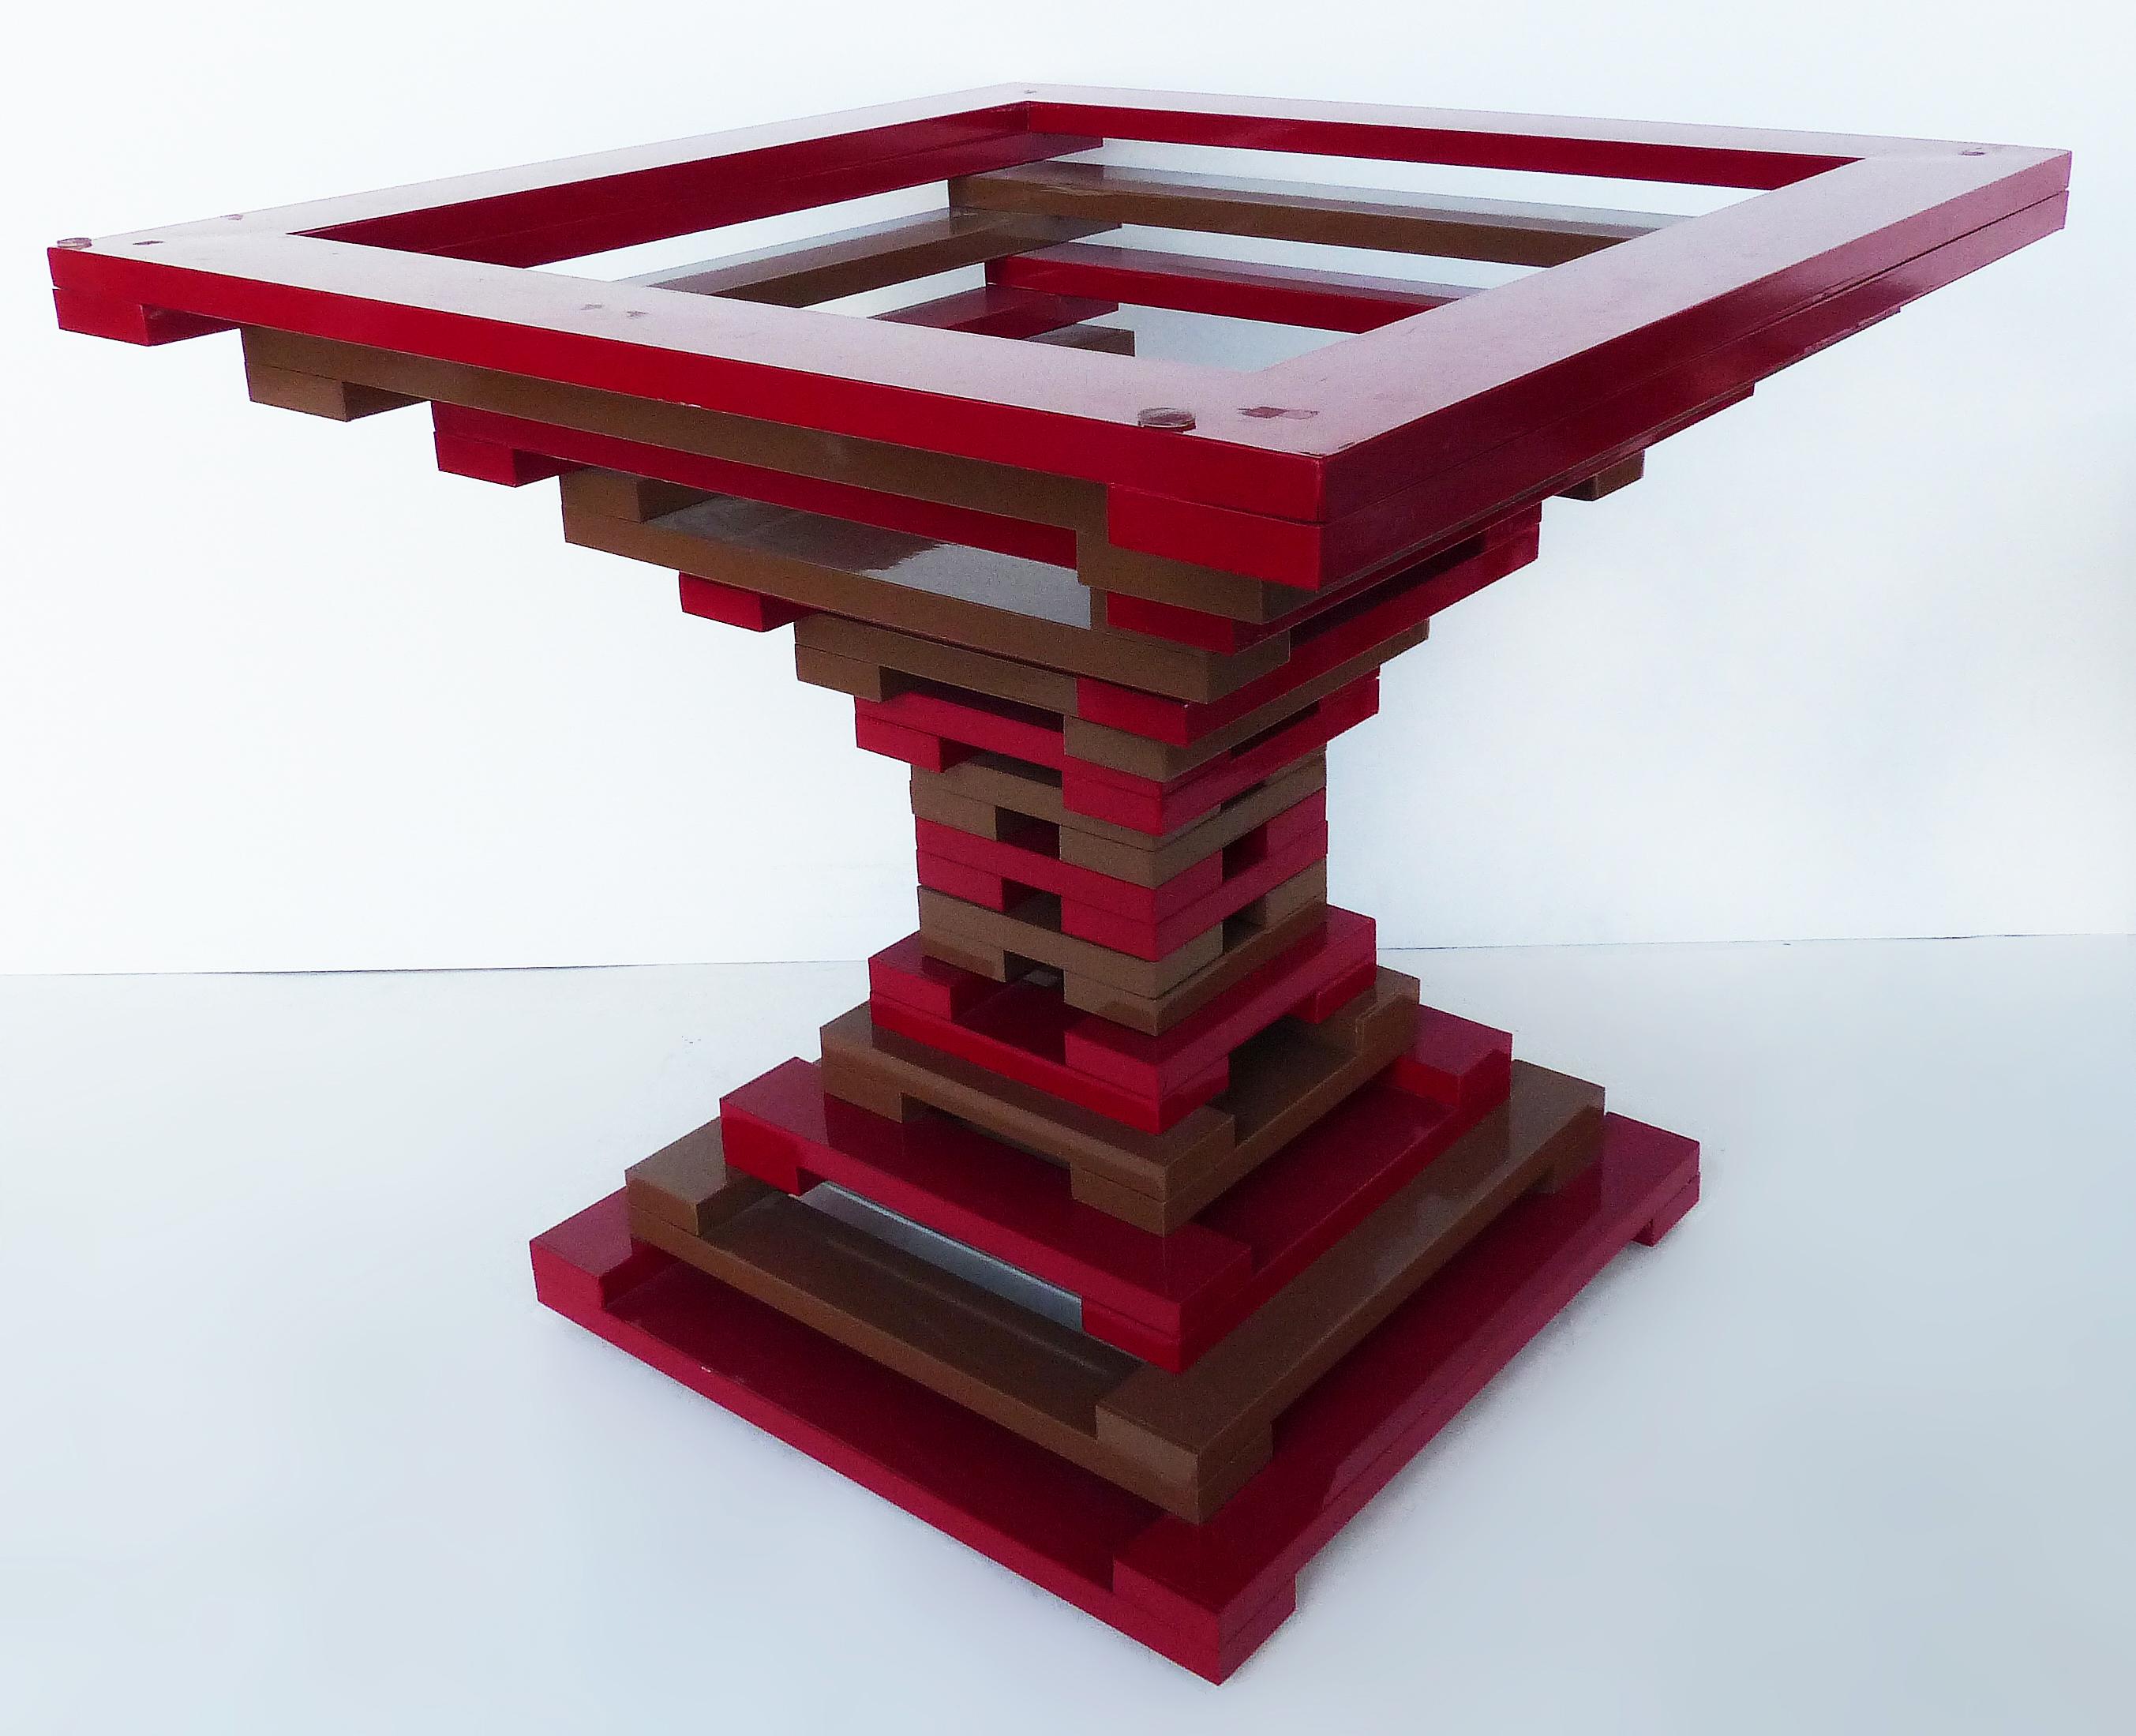 Vintage geometric enameled metal center table with glass top

Offered for sale is an enameled metal geometric center table in red and chocolate enameled finish and square glass top. This is a wonderful decorative statement piece and is versatile